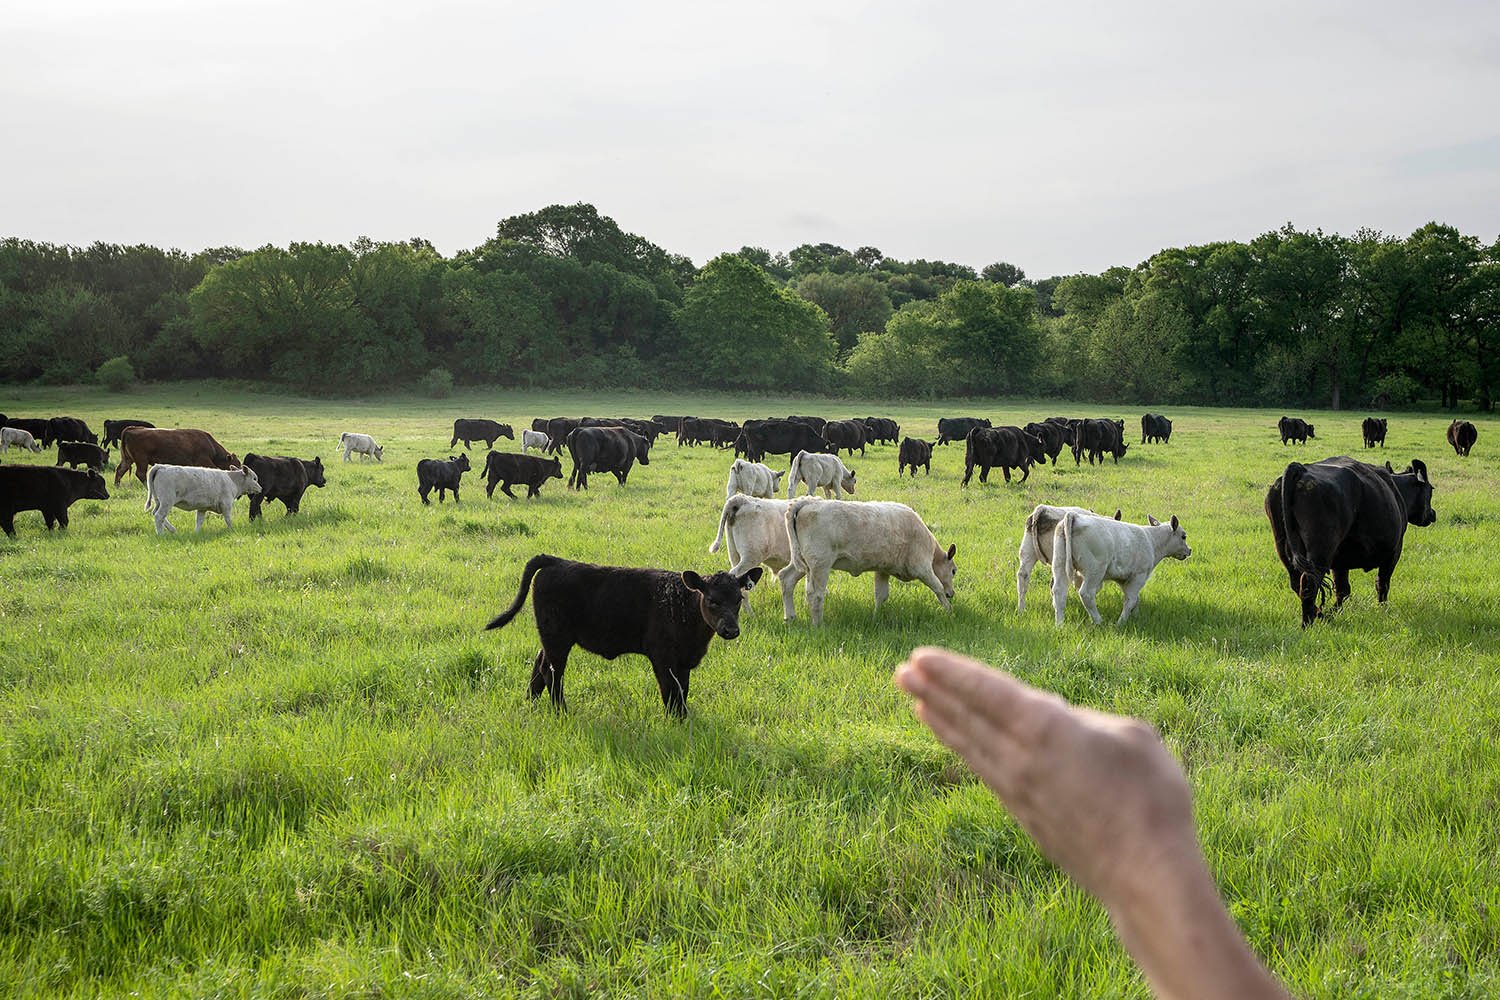  Meredith Ellis counts cattle at her ranch in Rosston, Texas, Thursday, April 20, 2023. The cattle part as Ellis edges her small four-wheeler through the herd, silently counting the cows and their calves. It’s the way she starts most days on her 3,00